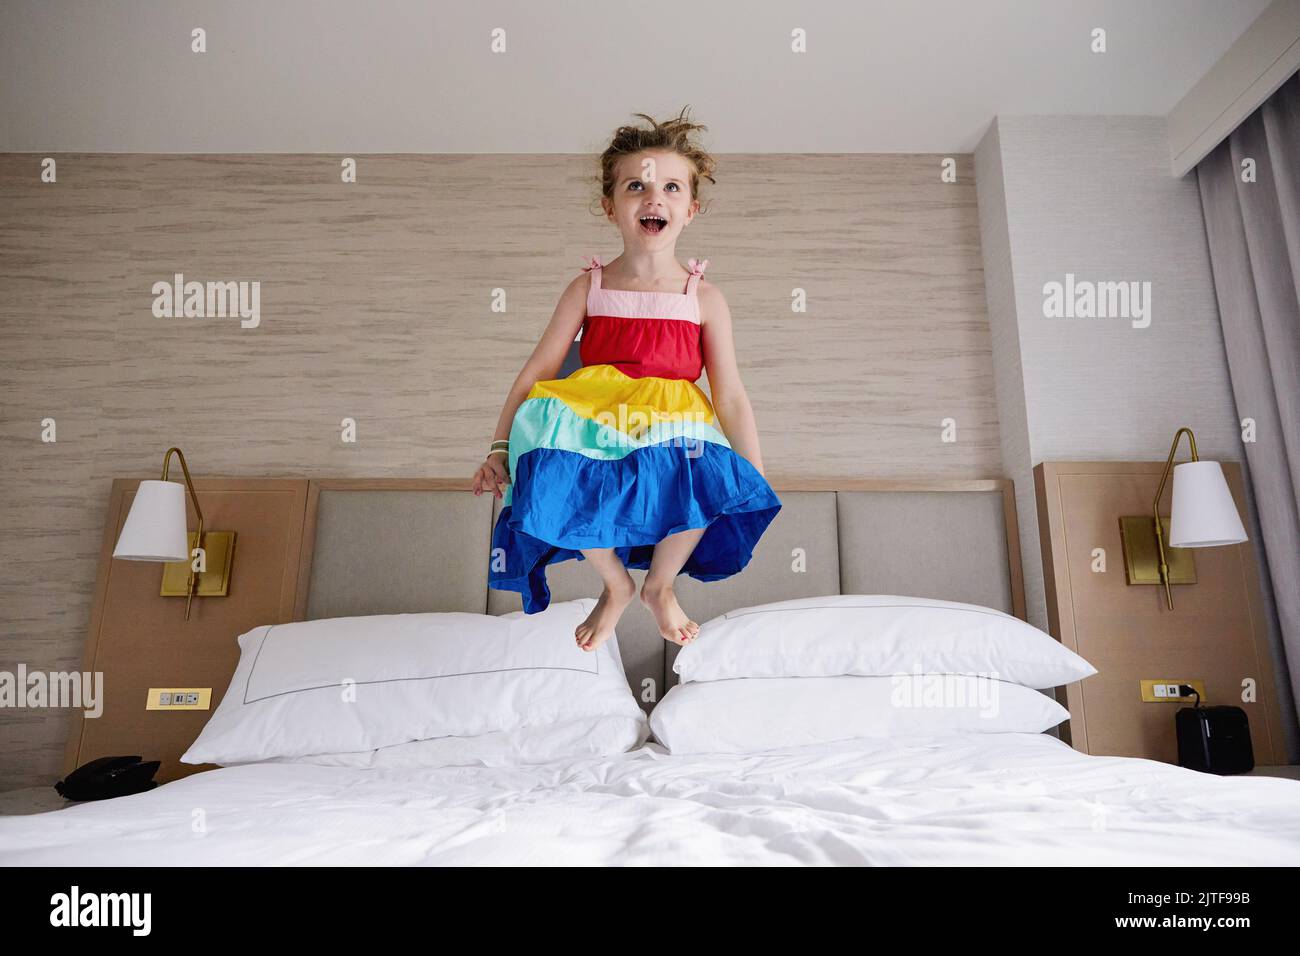 Smiling girl (4-5) jumping on bed Stock Photo